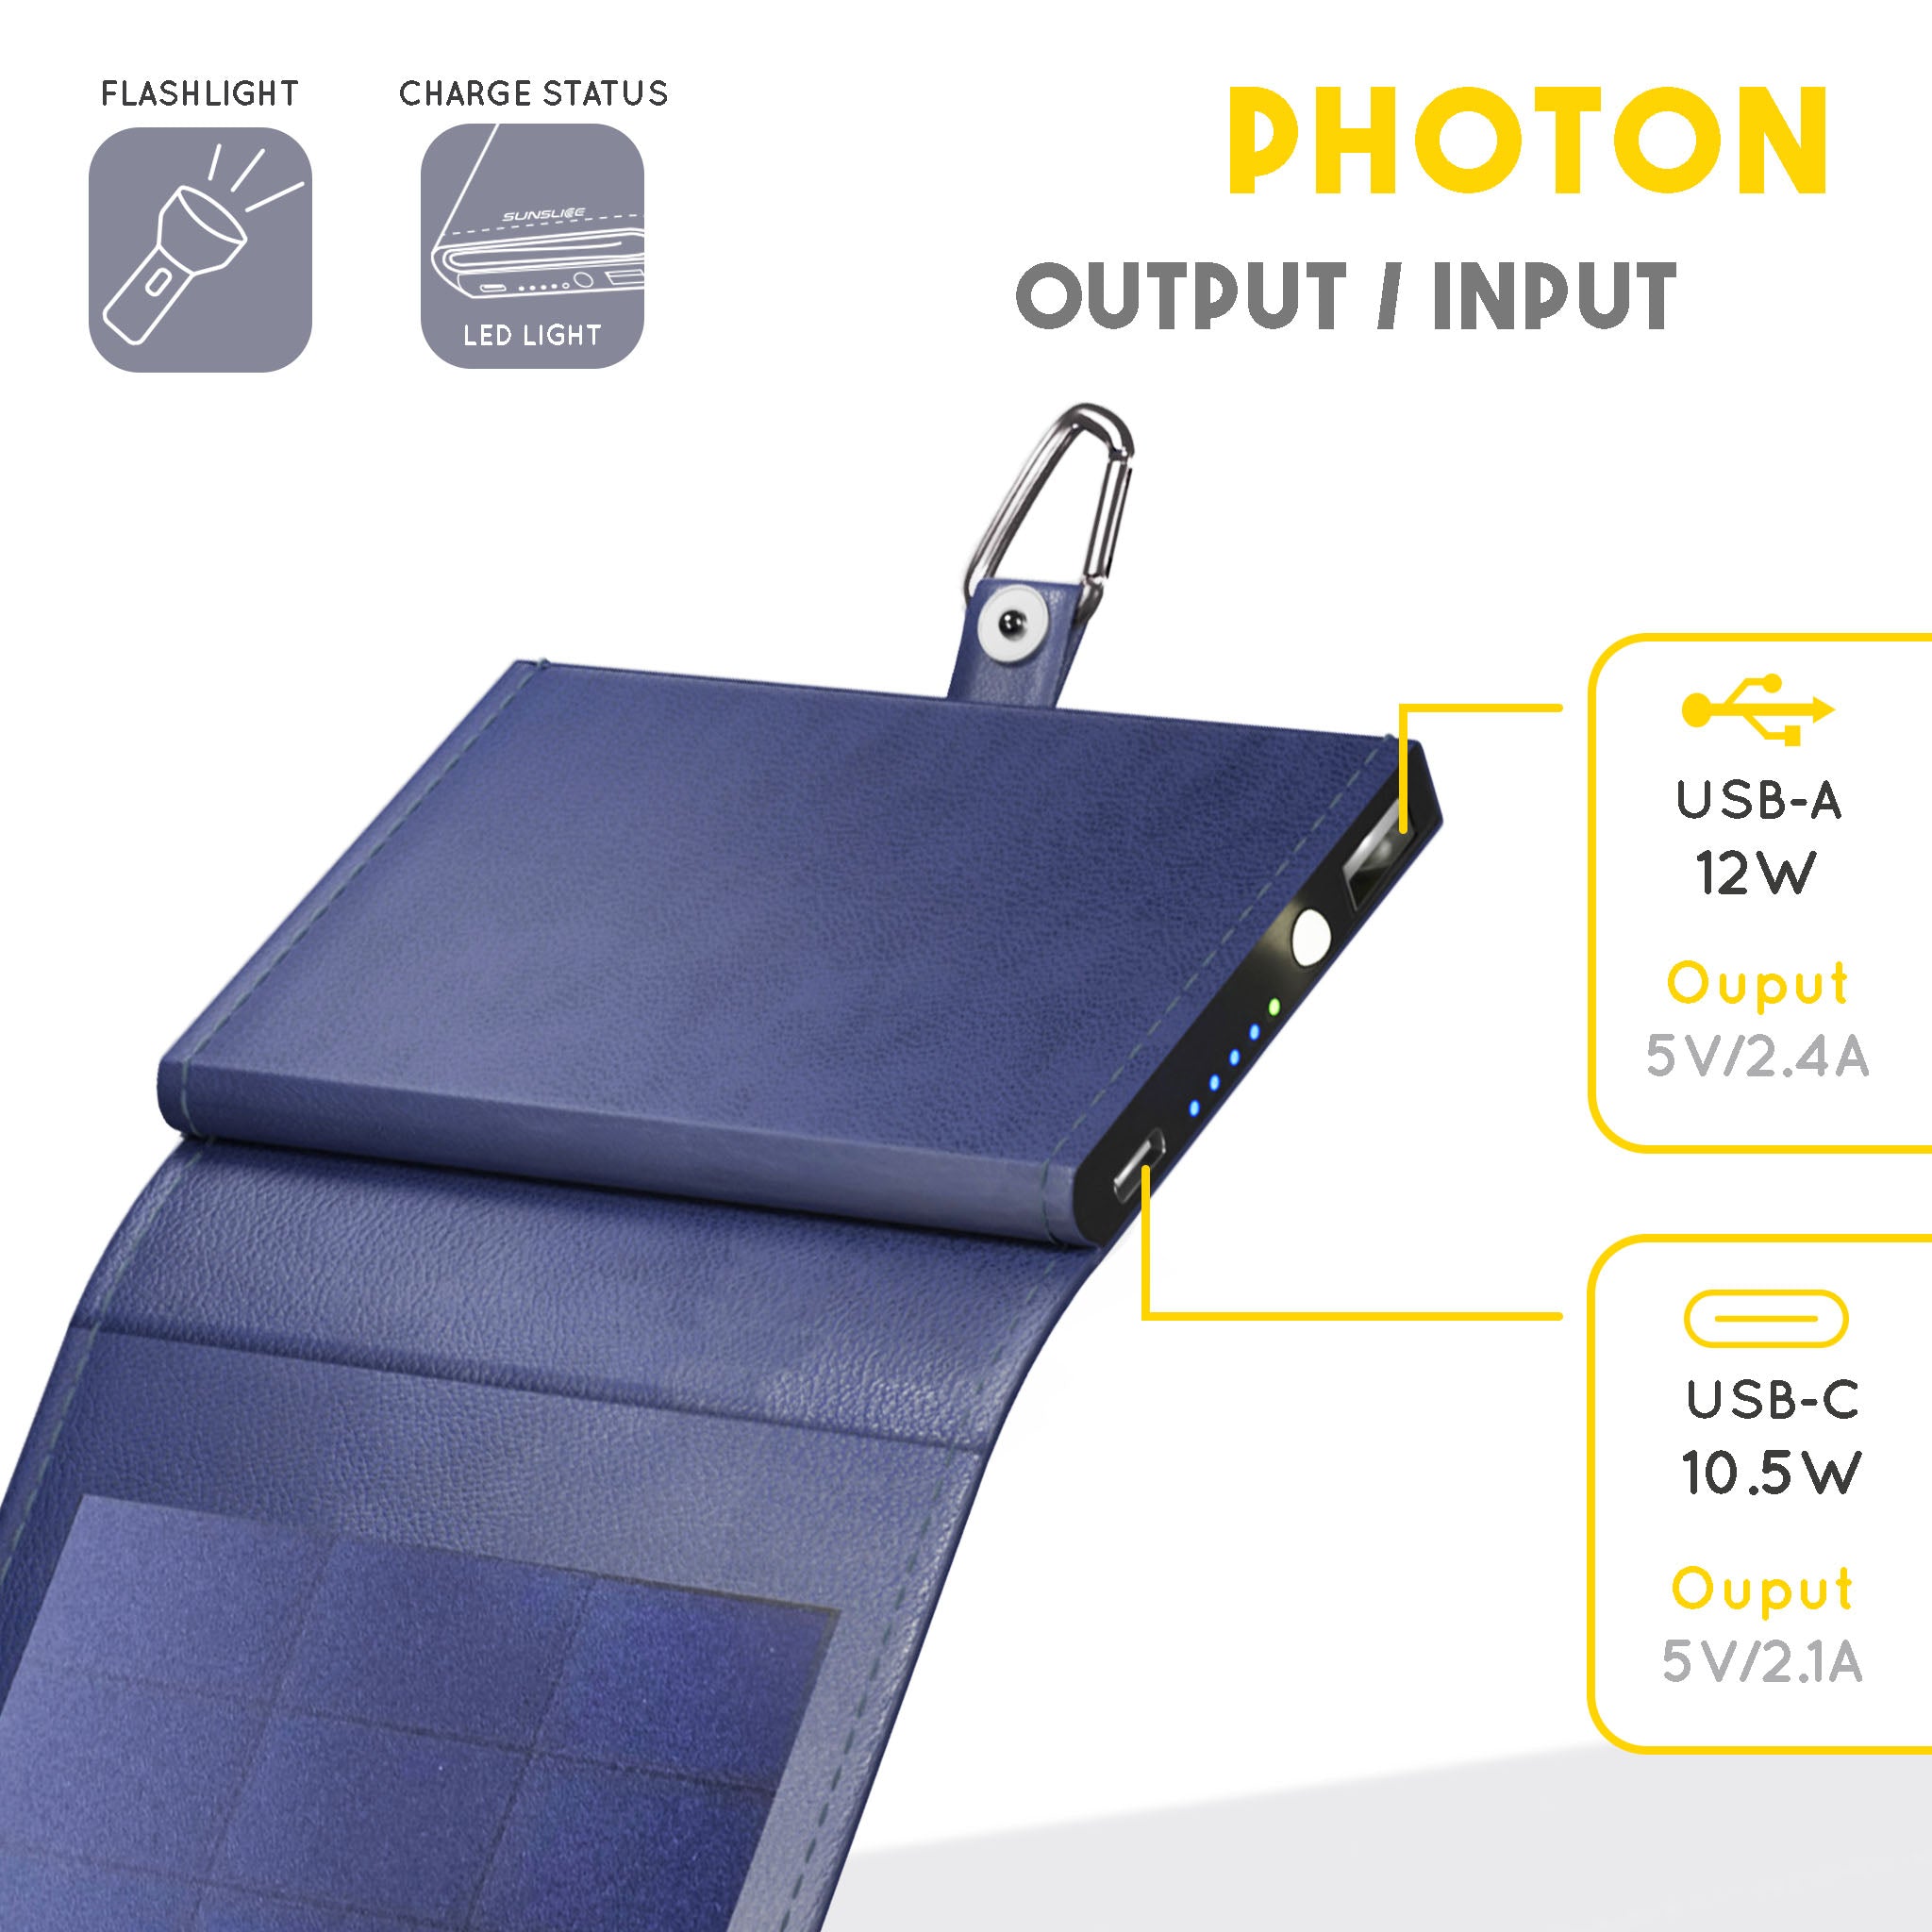 technical specifications of the Photon the best solar phone charger. output: USB-A 12W, USB-C 10.5W